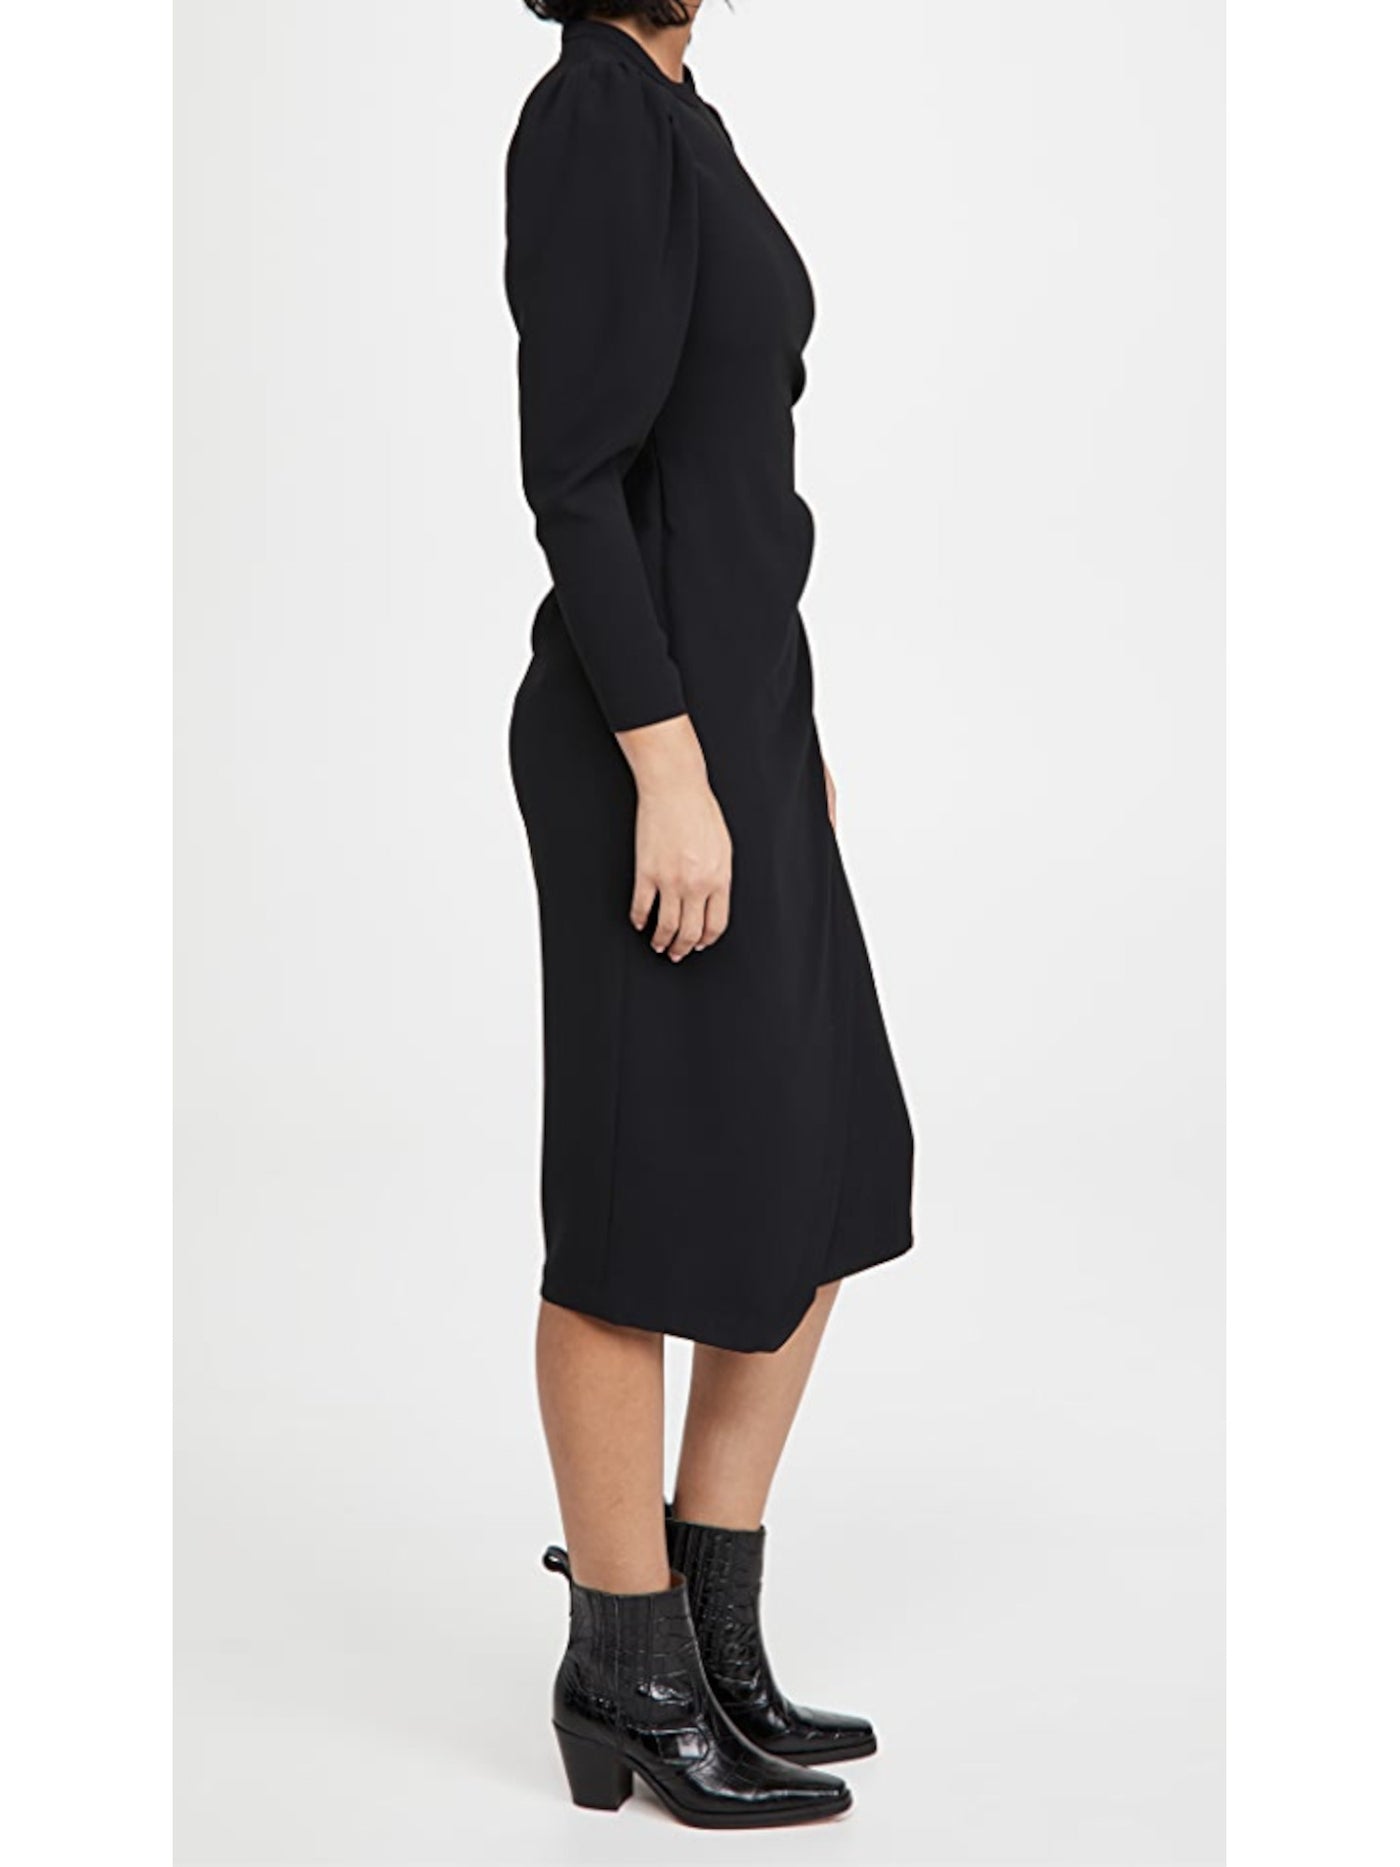 A.L.C. Womens Black Zippered Pleated Wrap Skirt Gathered Padded Pouf Sleeve Round Neck Below The Knee Sheath Dress 0